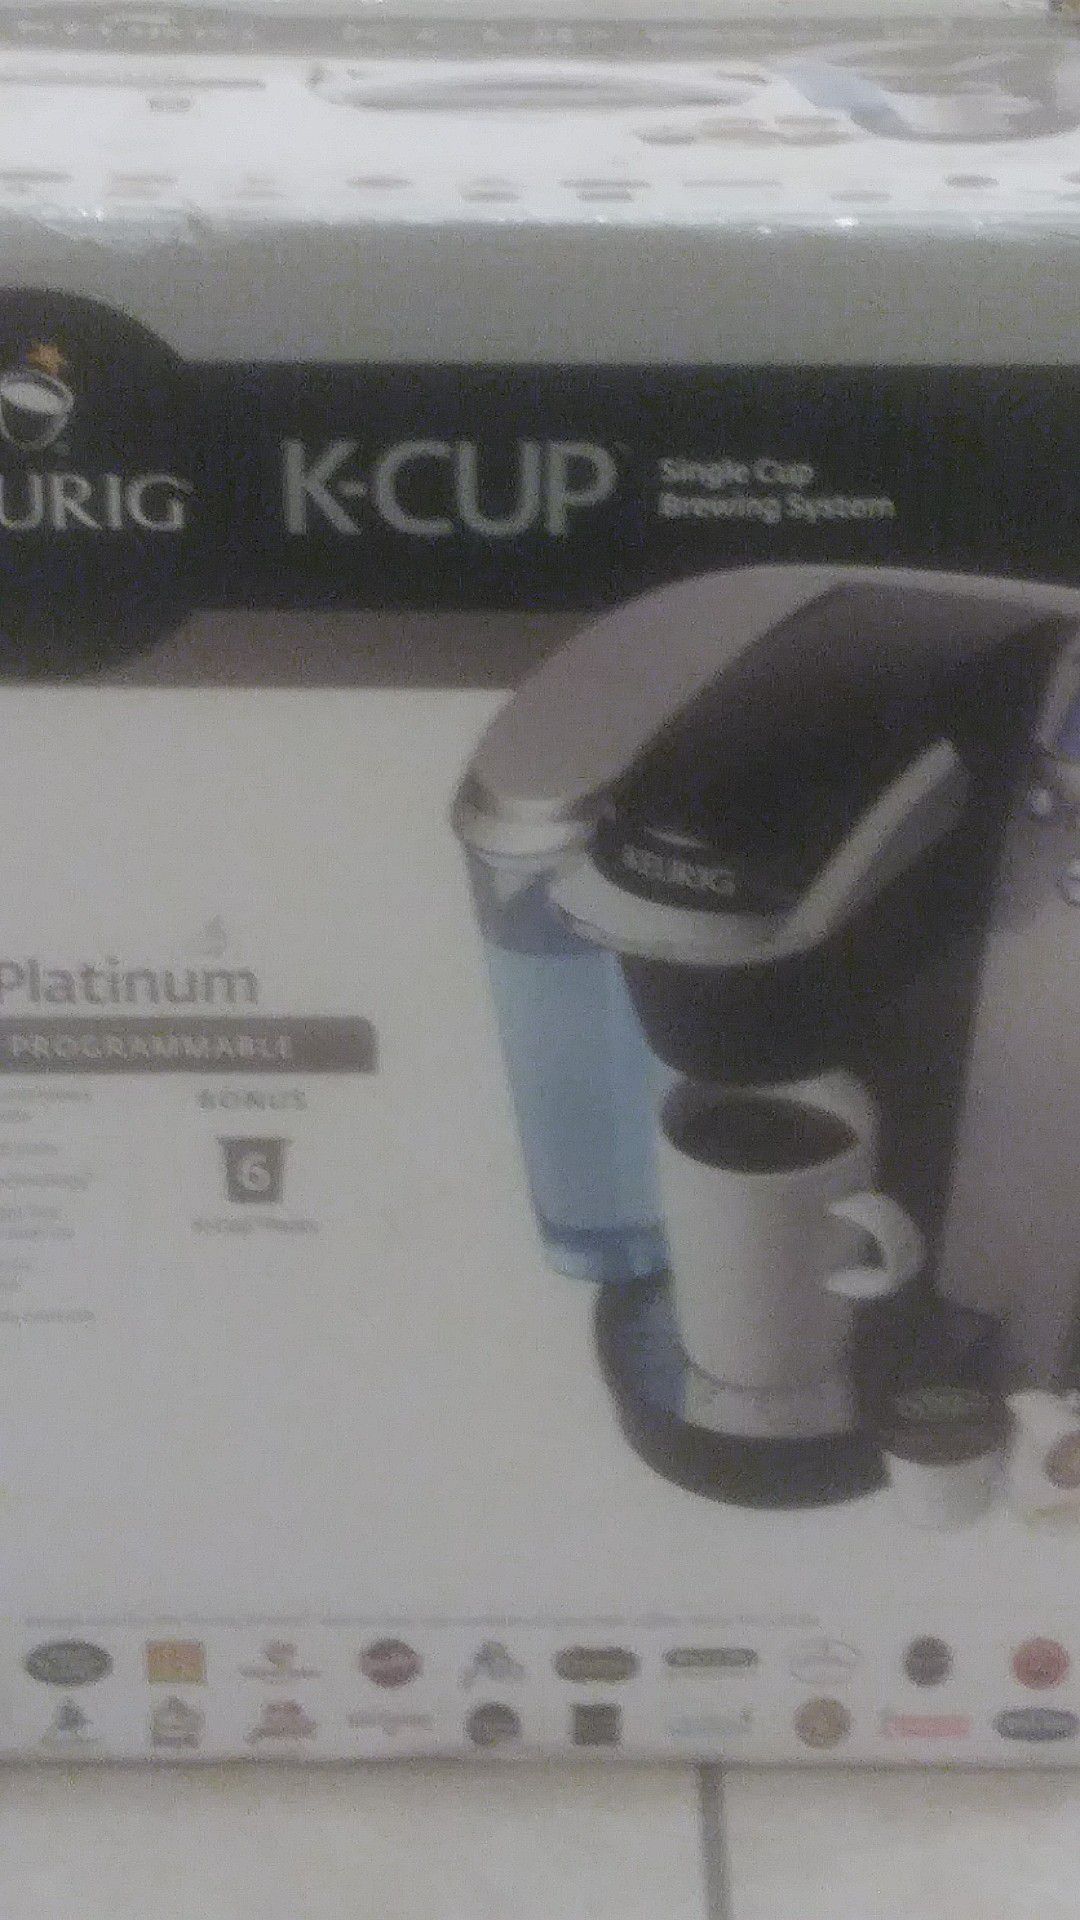 Keurig K-Cup single cup Brewing System k70 Platinum fully programmable